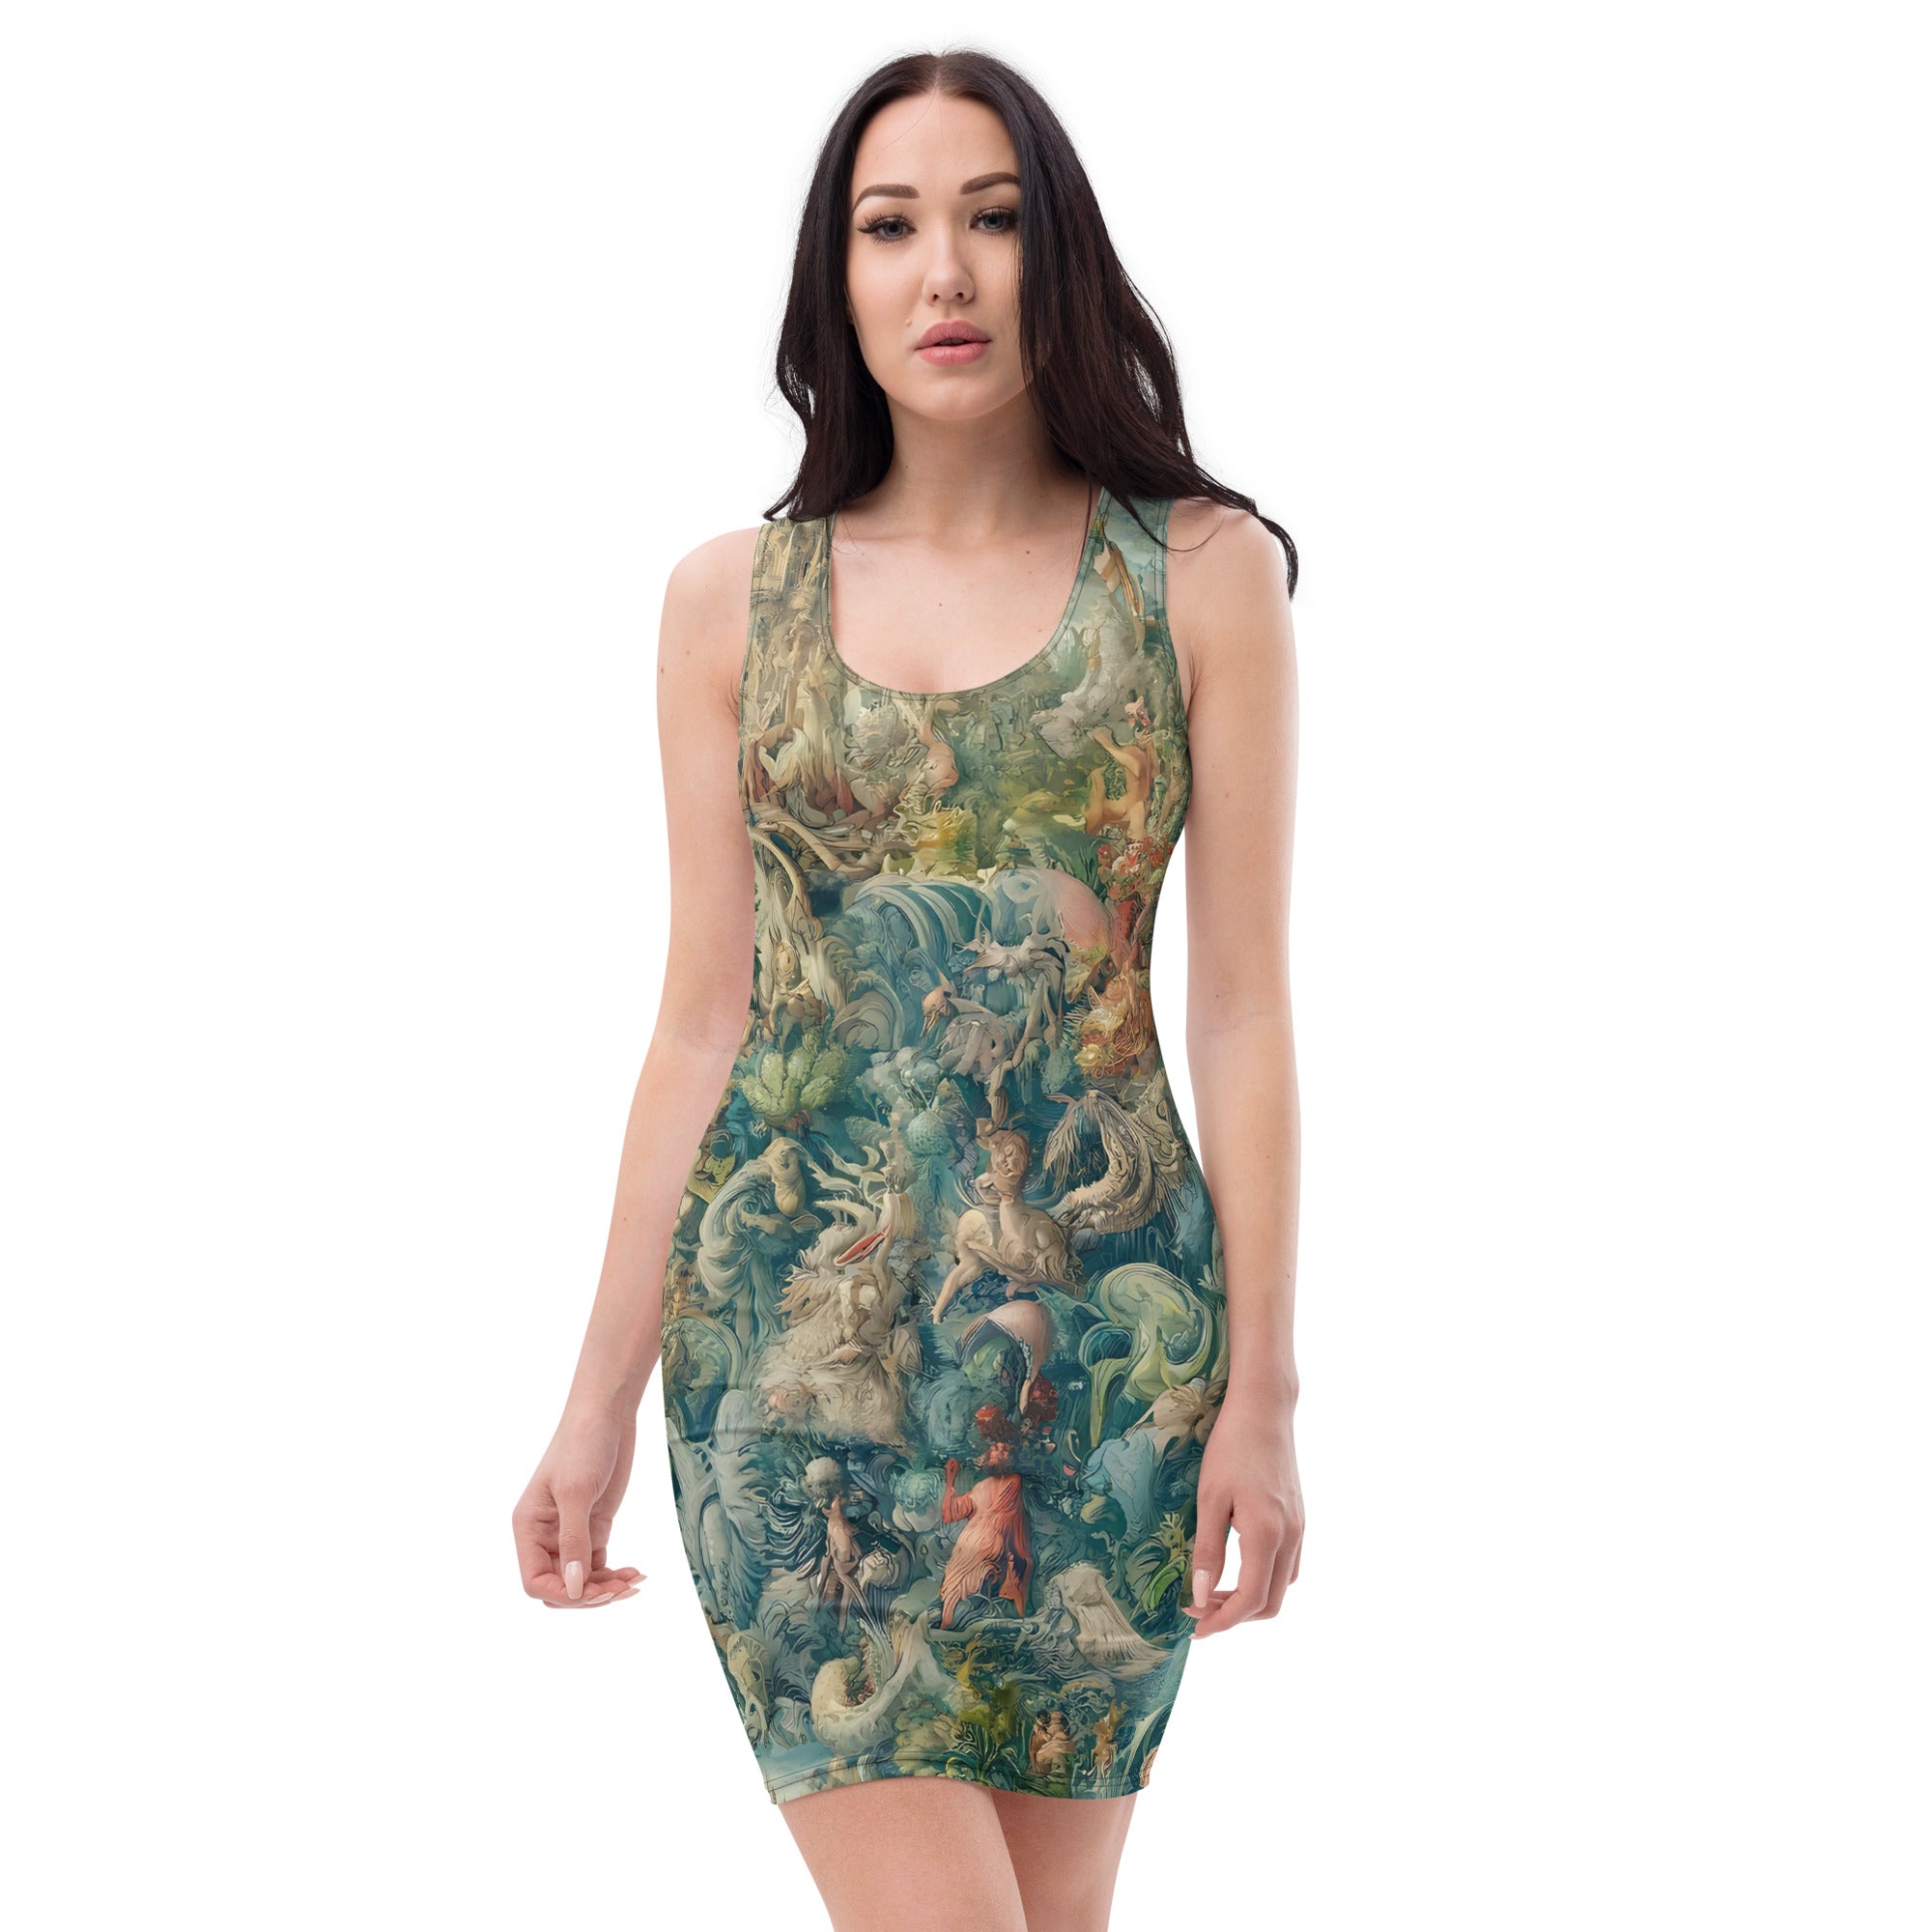 Hieronymus Bosch 'The Garden of Earthly Delights' Famous Painting Bodycon Dress | Premium Art Dress